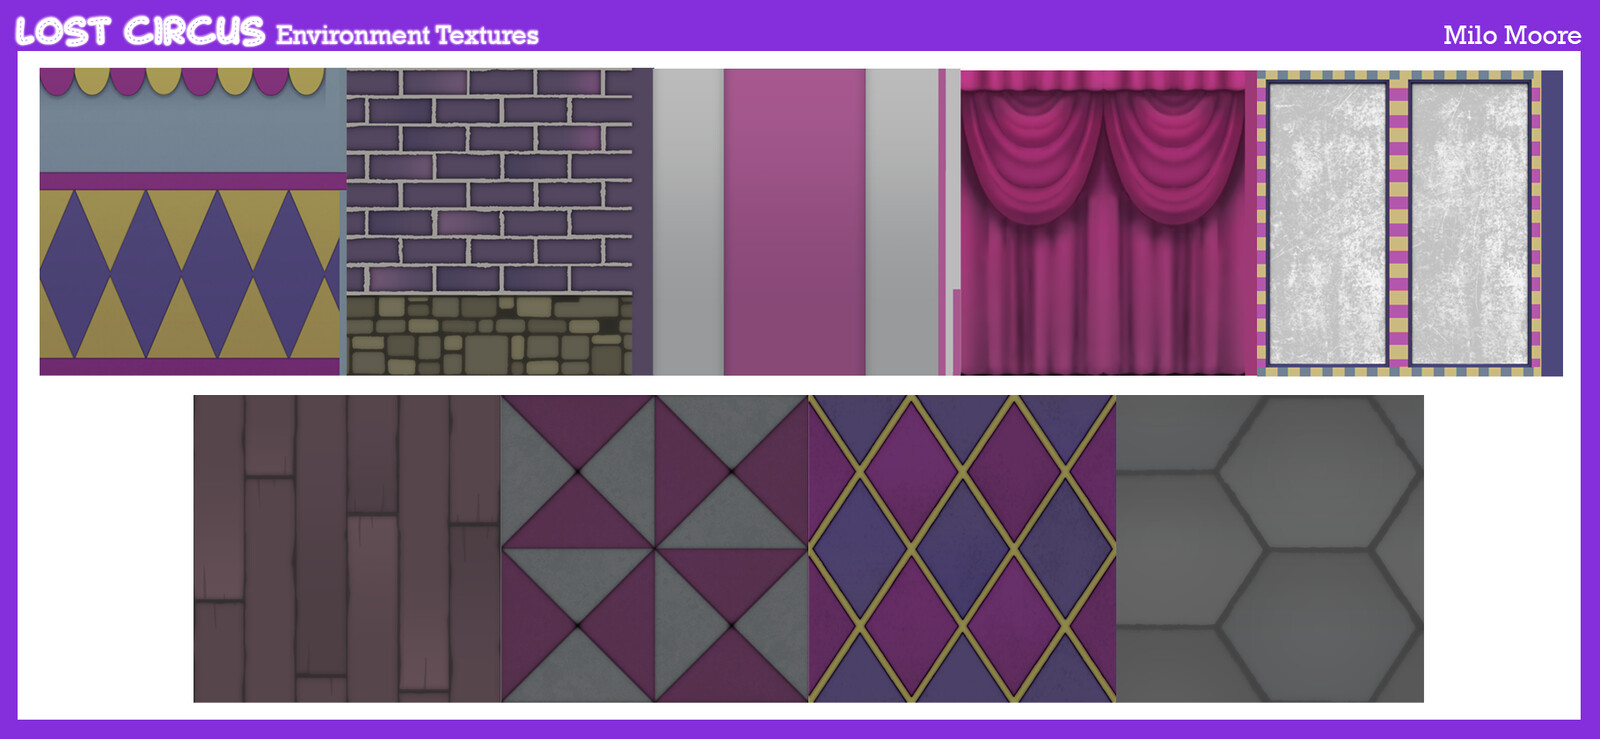 Environment textures for walls and floors